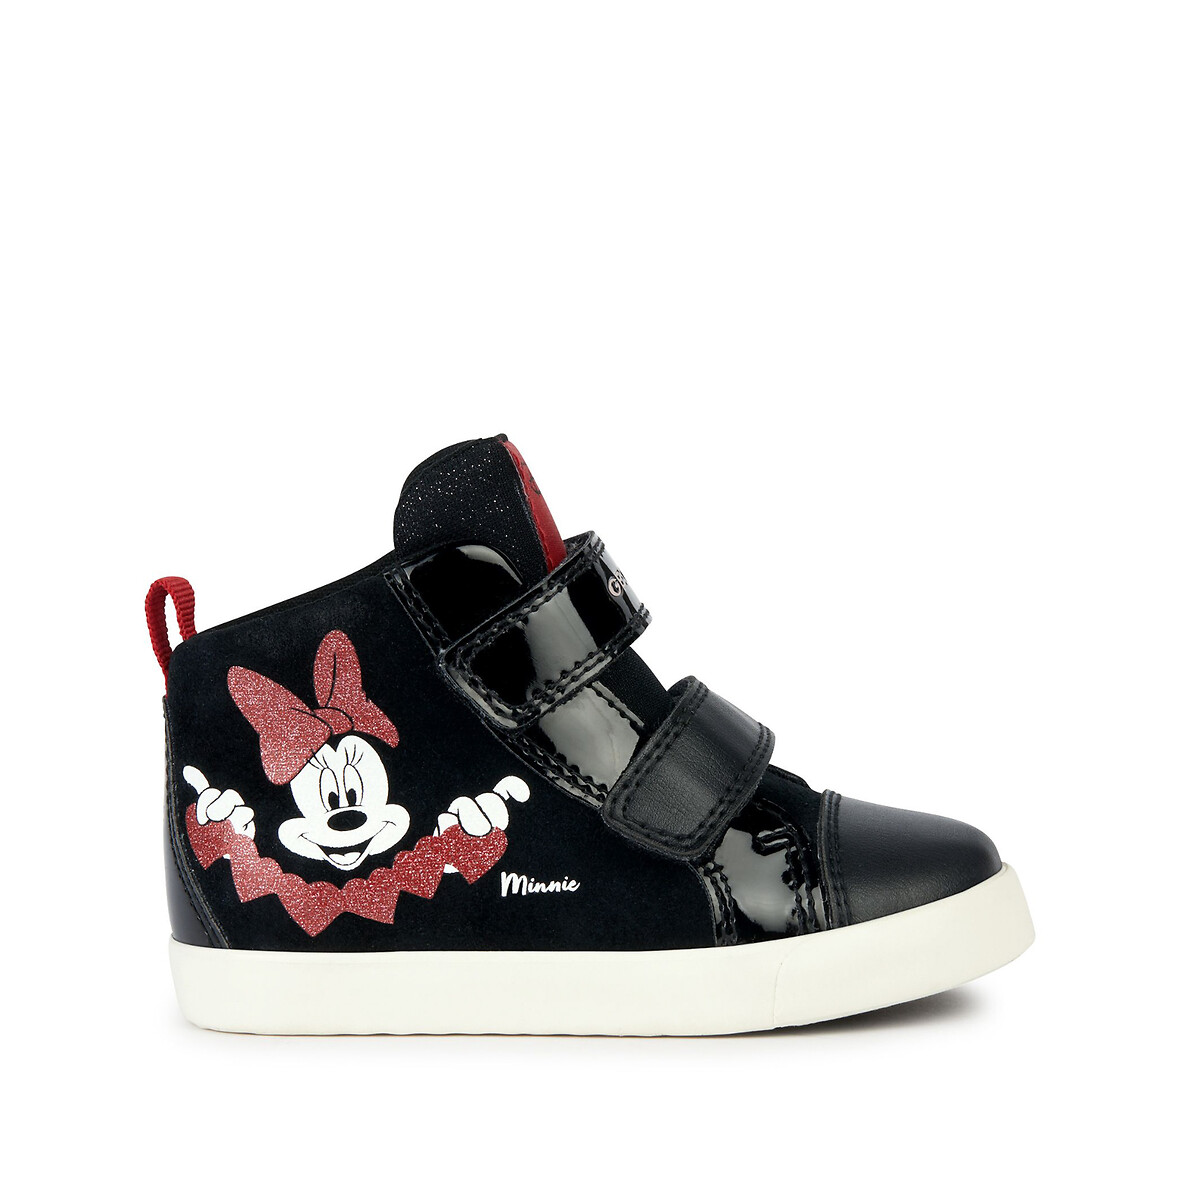 Kids Kilwi x Mini Leather Breathable High Top Trainers with Touch ’n’ Close Fastening